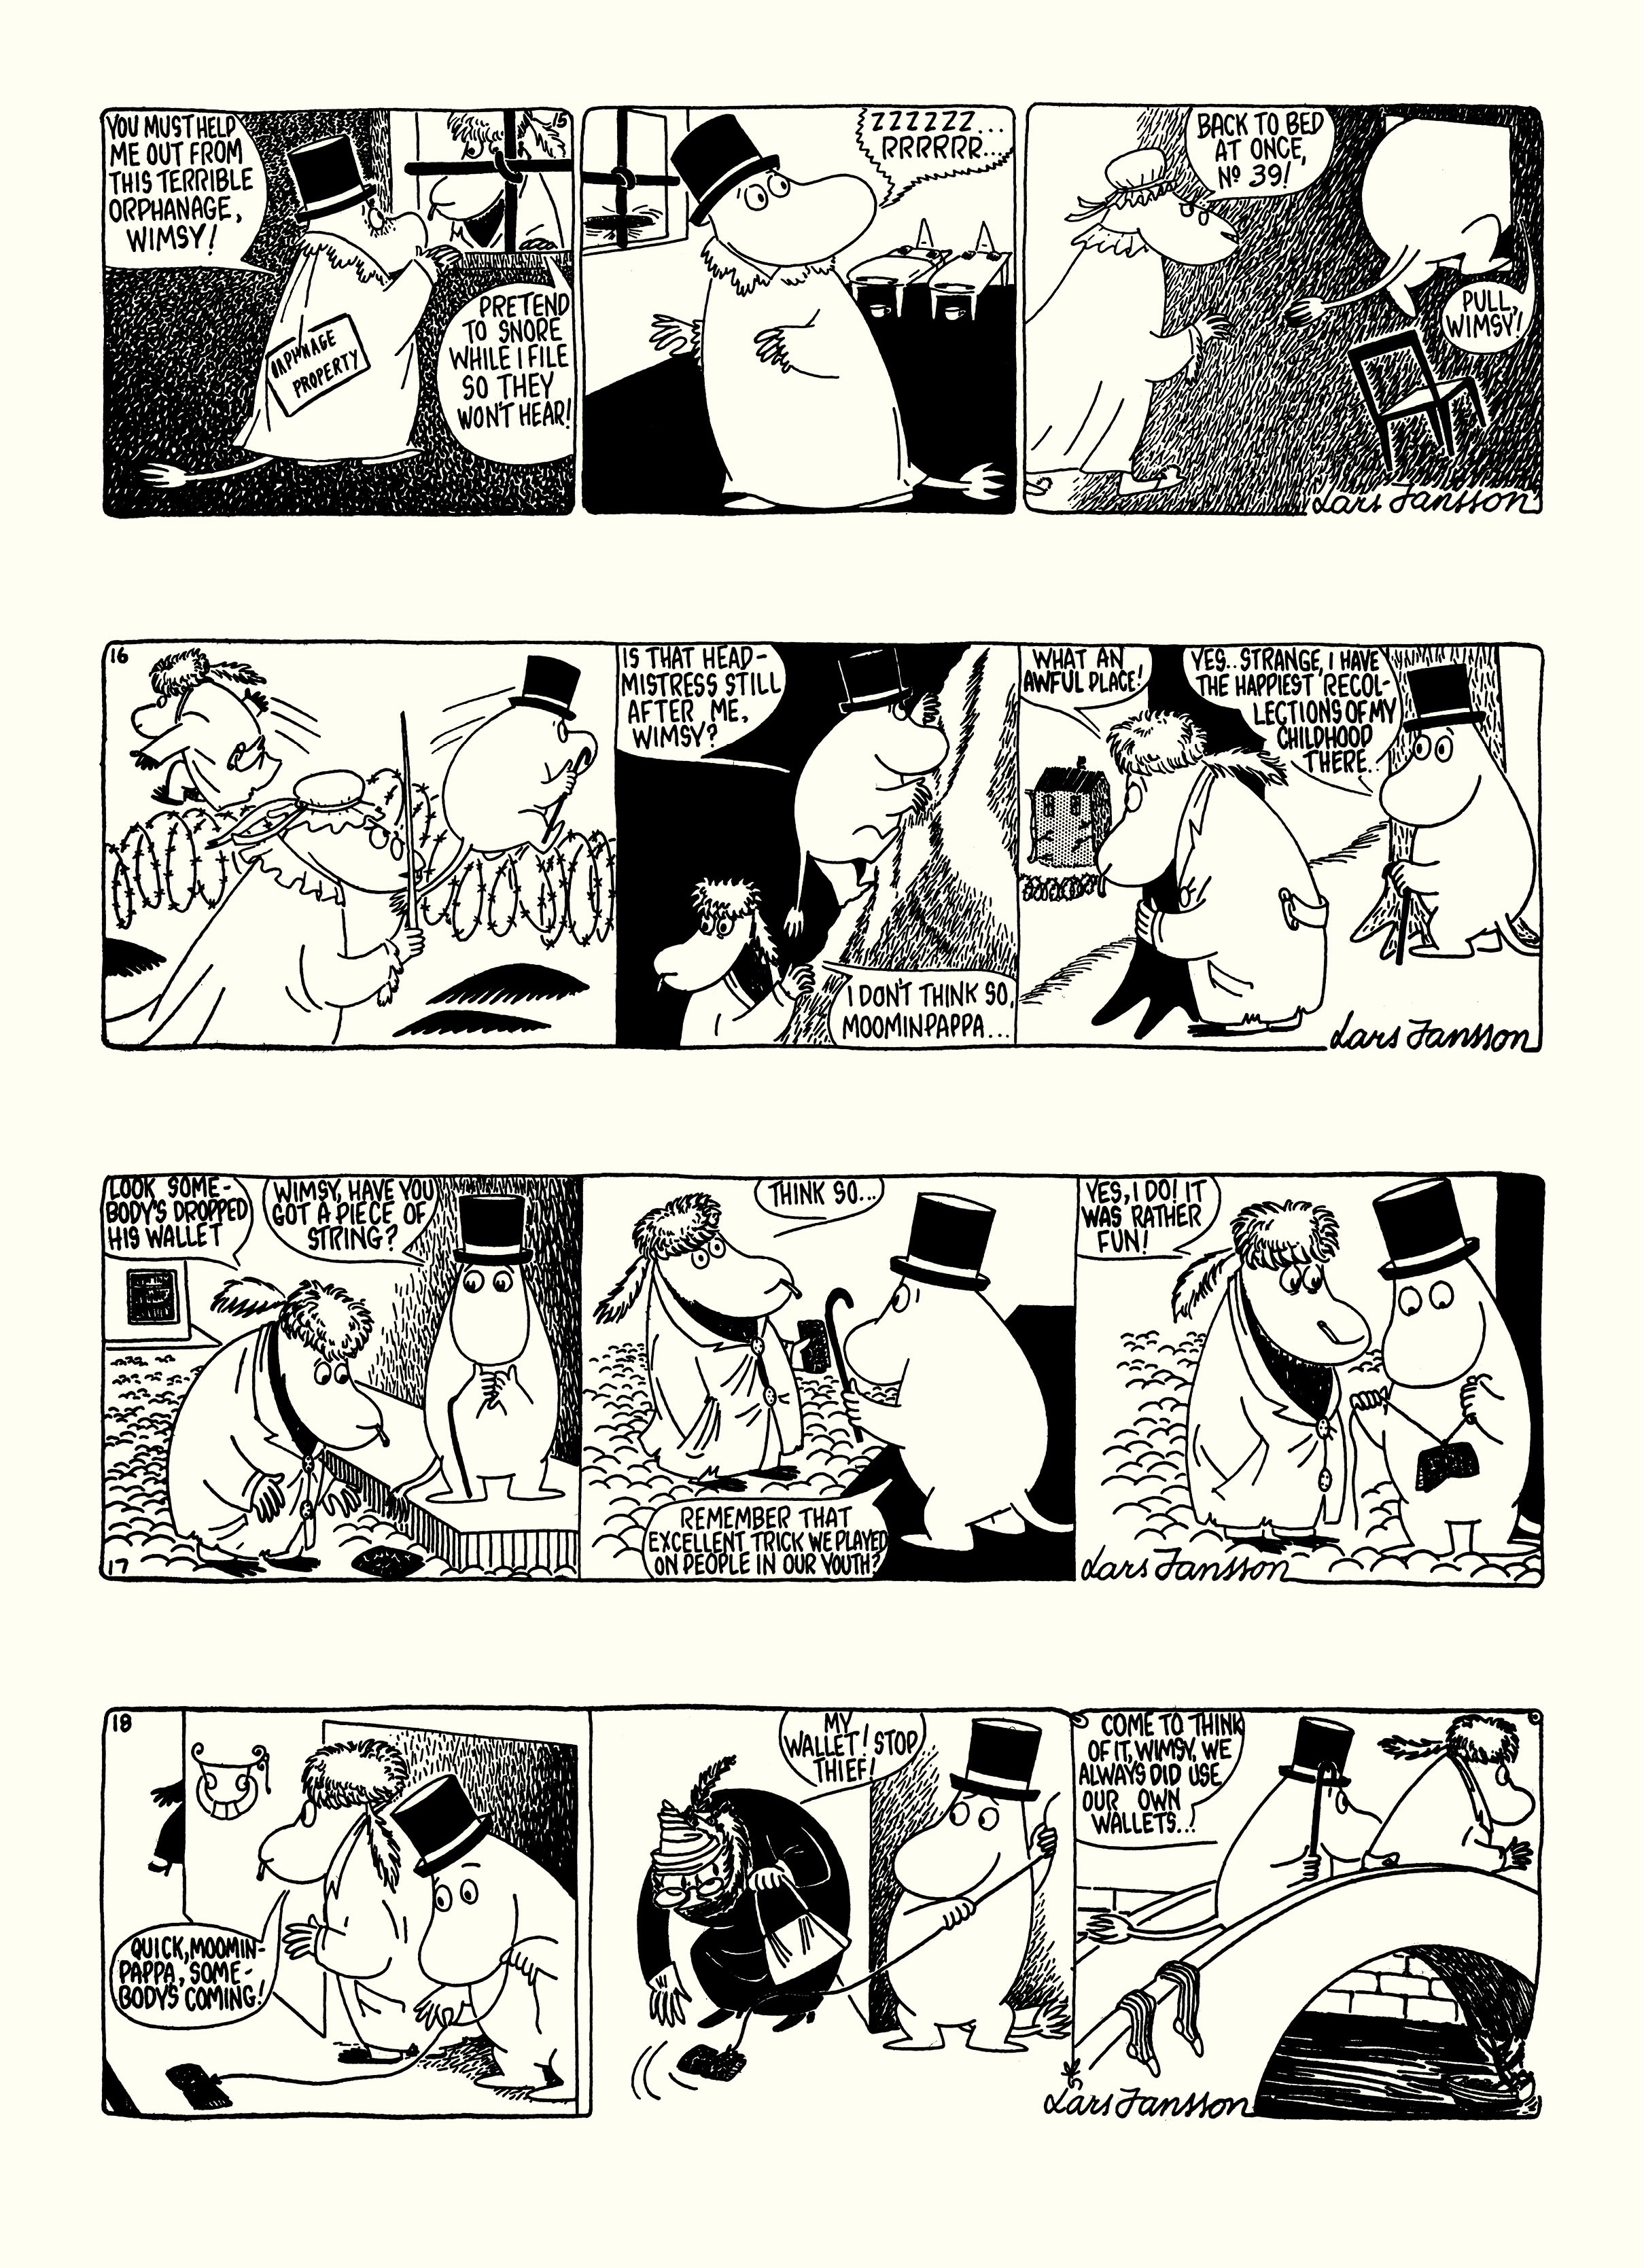 Read online Moomin: The Complete Lars Jansson Comic Strip comic -  Issue # TPB 6 - 51